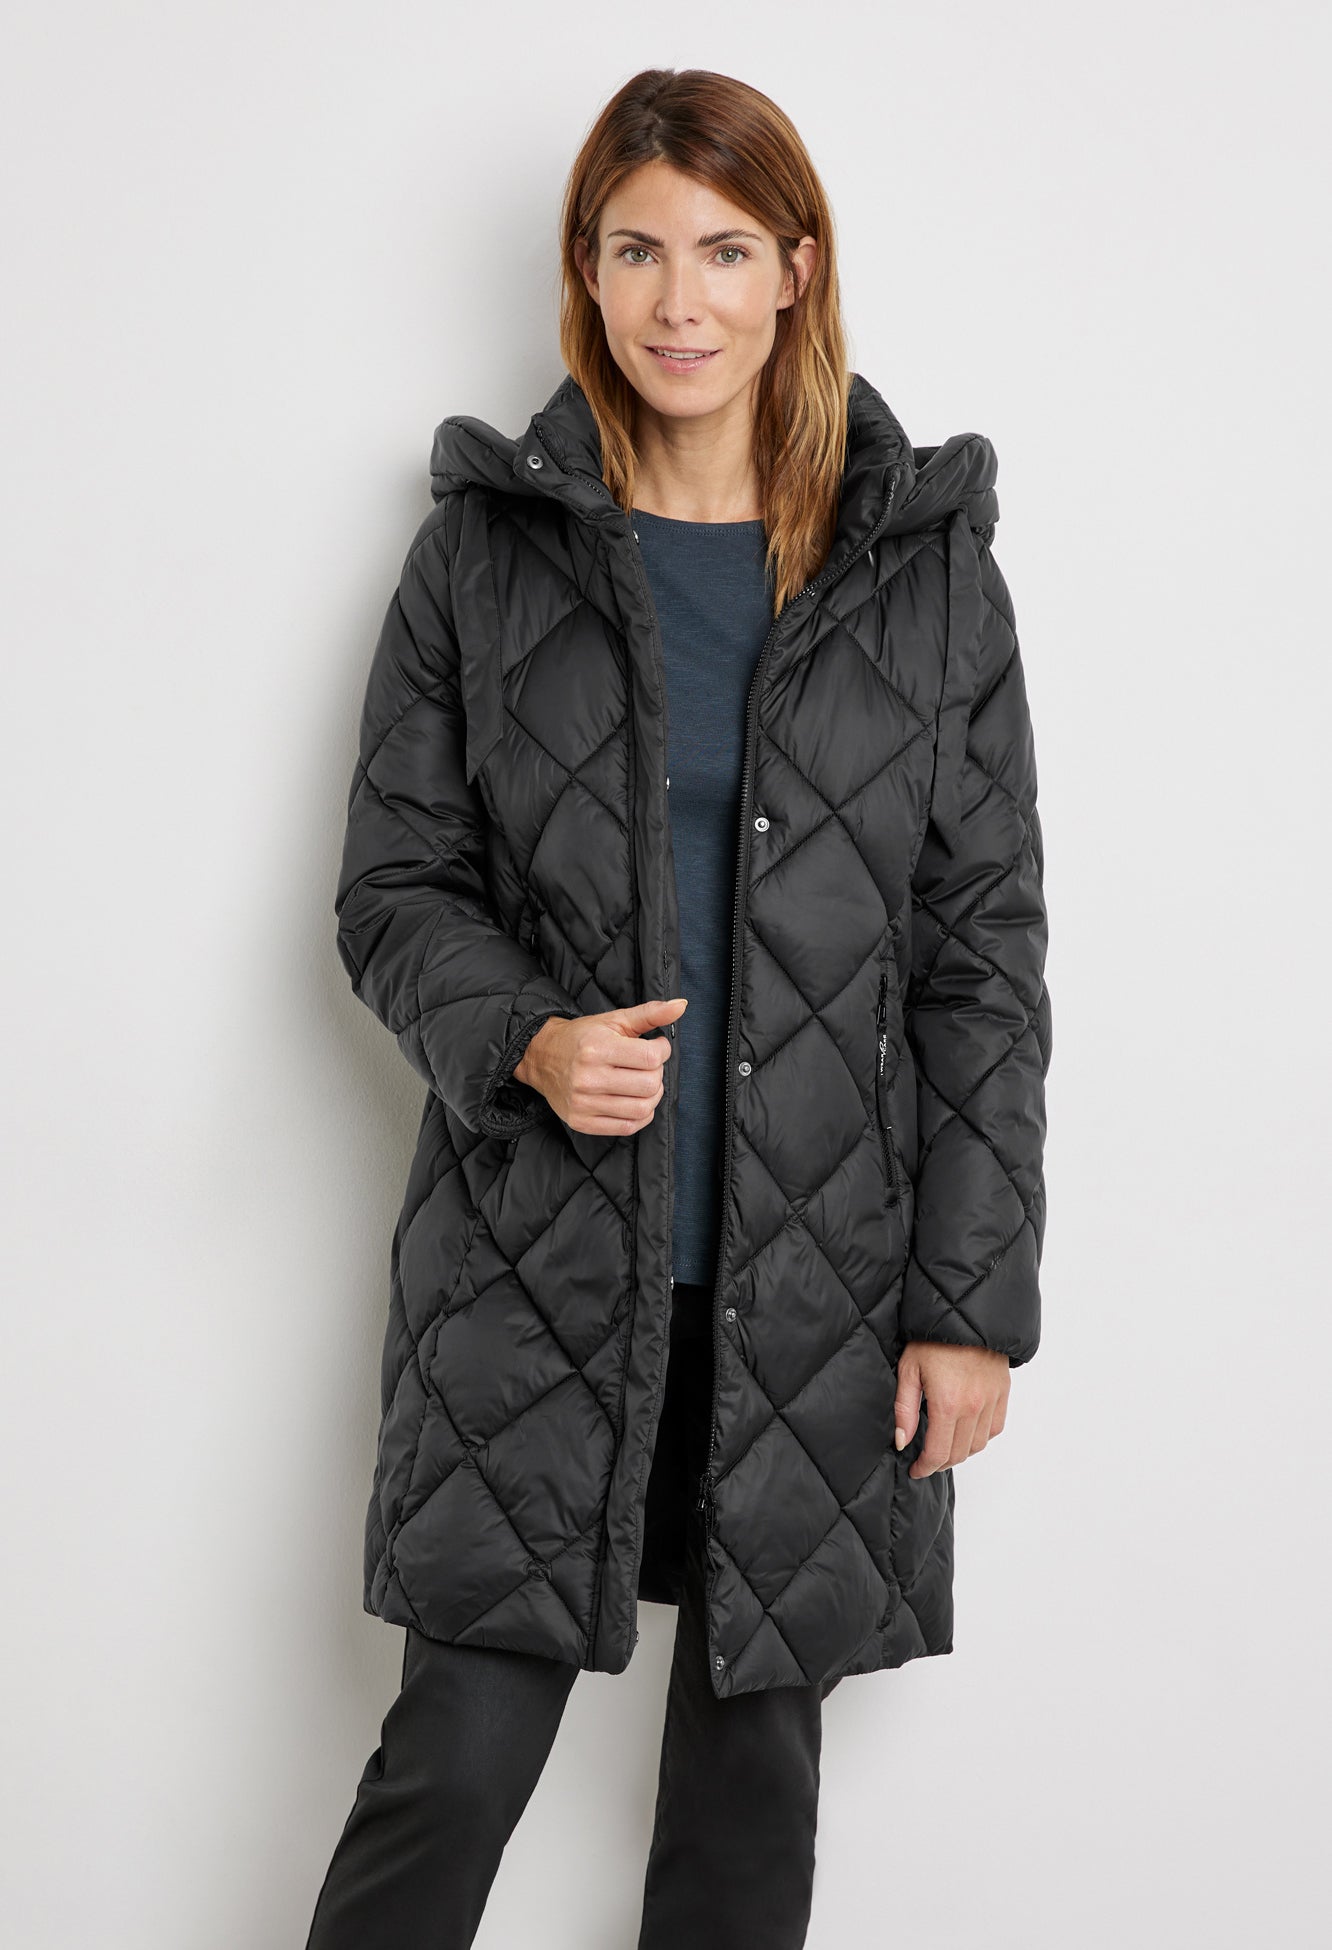 Quilted Hooded Coat